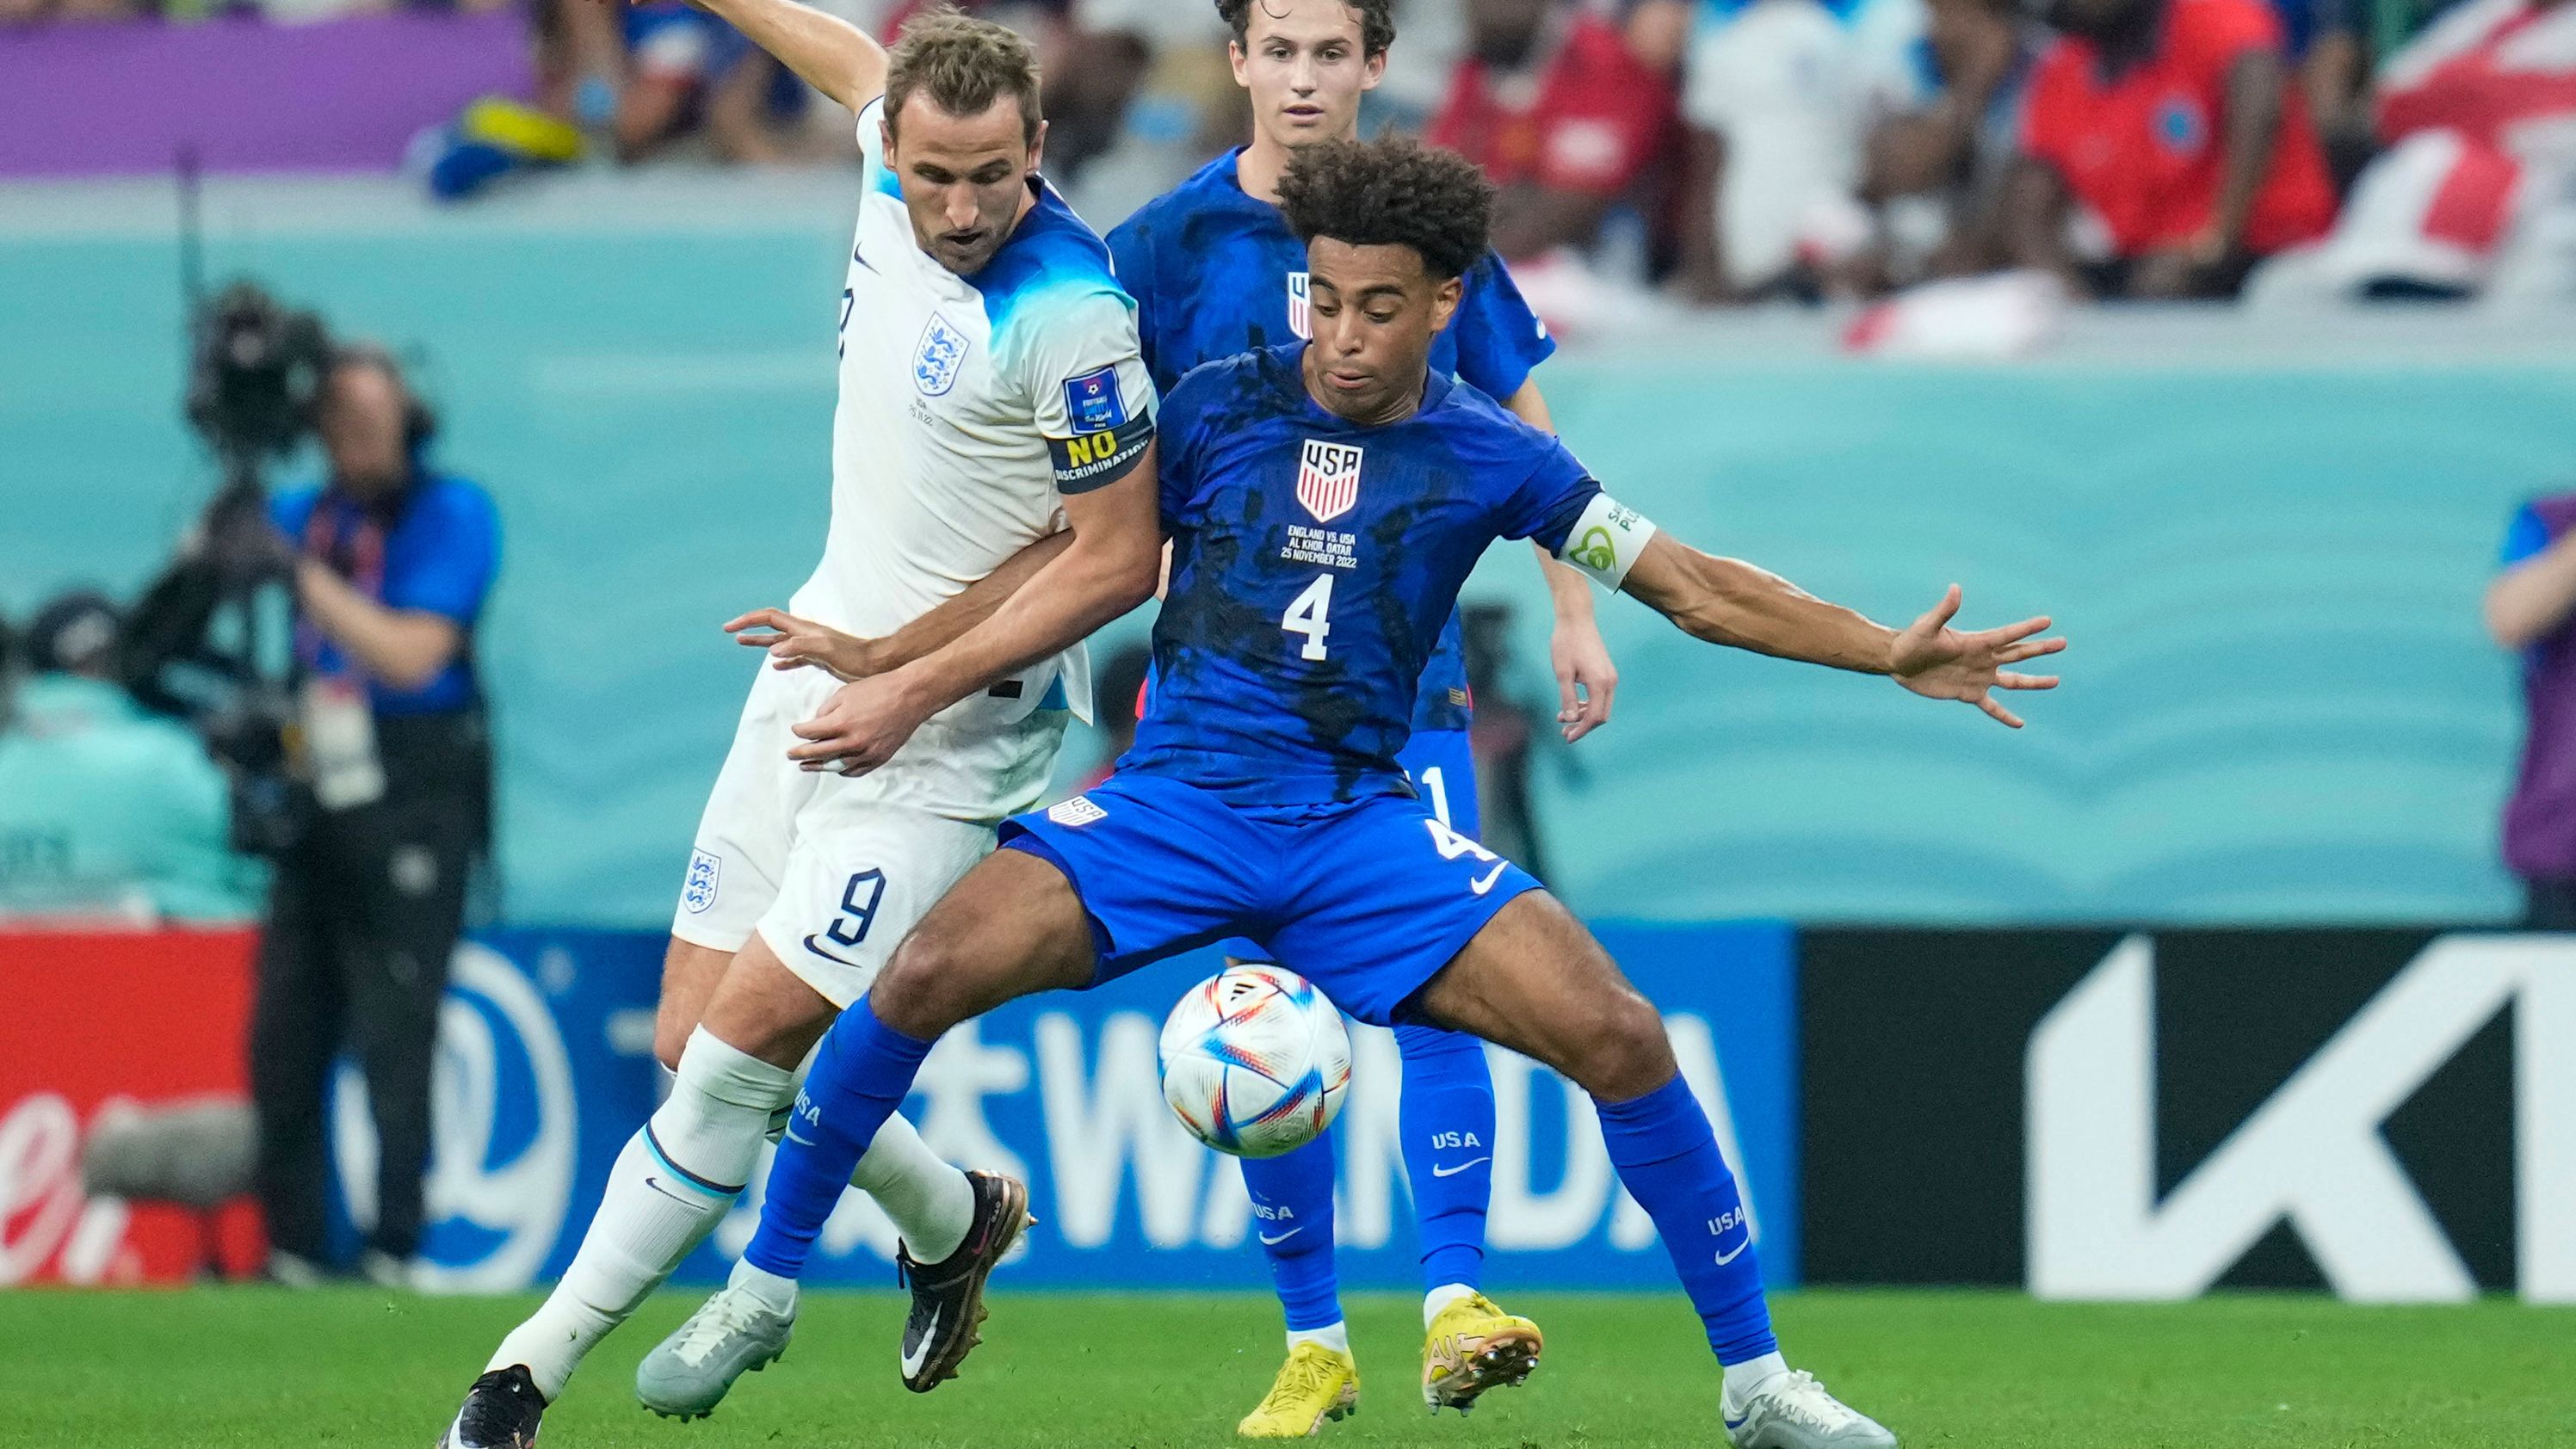 Two draws have given the USMNT a chance to reach the knockout stages of the World Cup.